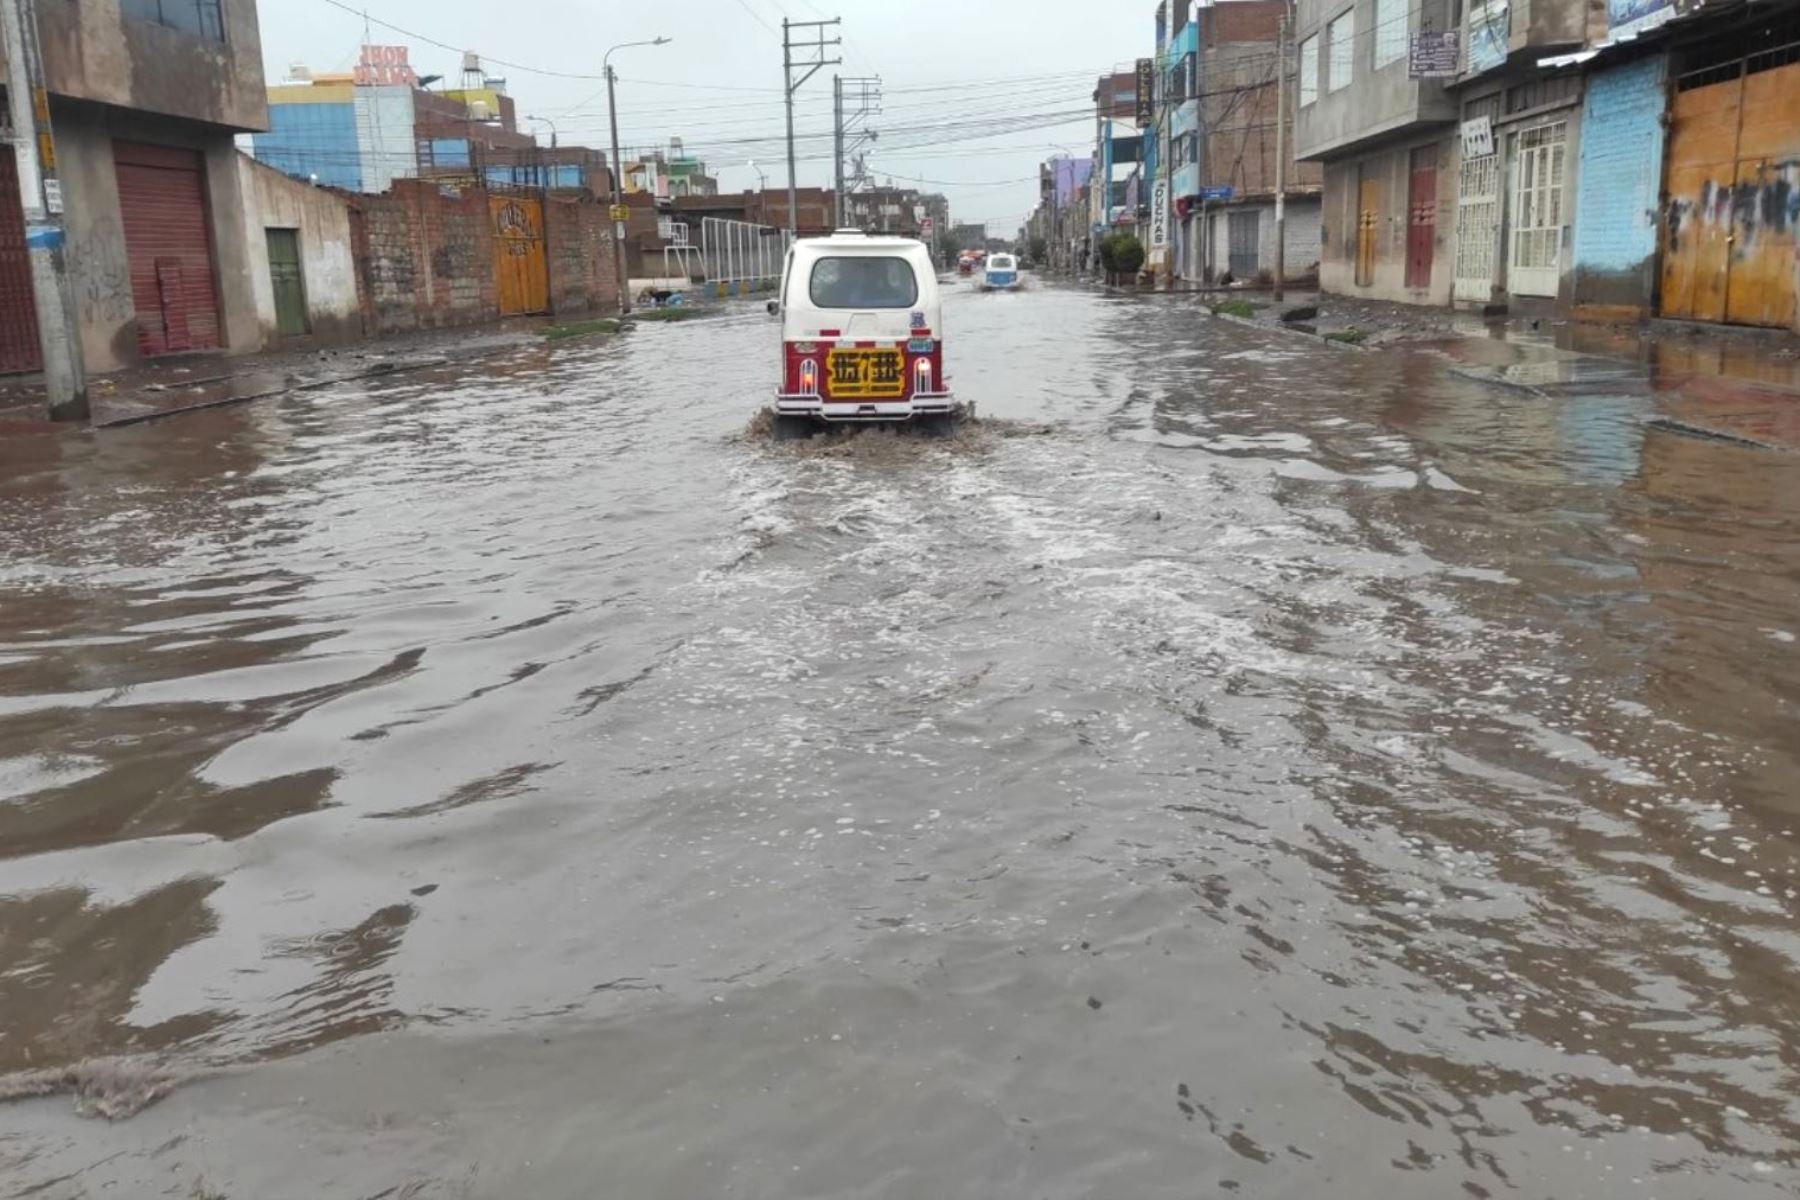 With Punche Emergency: What are the main measures to deal with the crisis due to the rains?